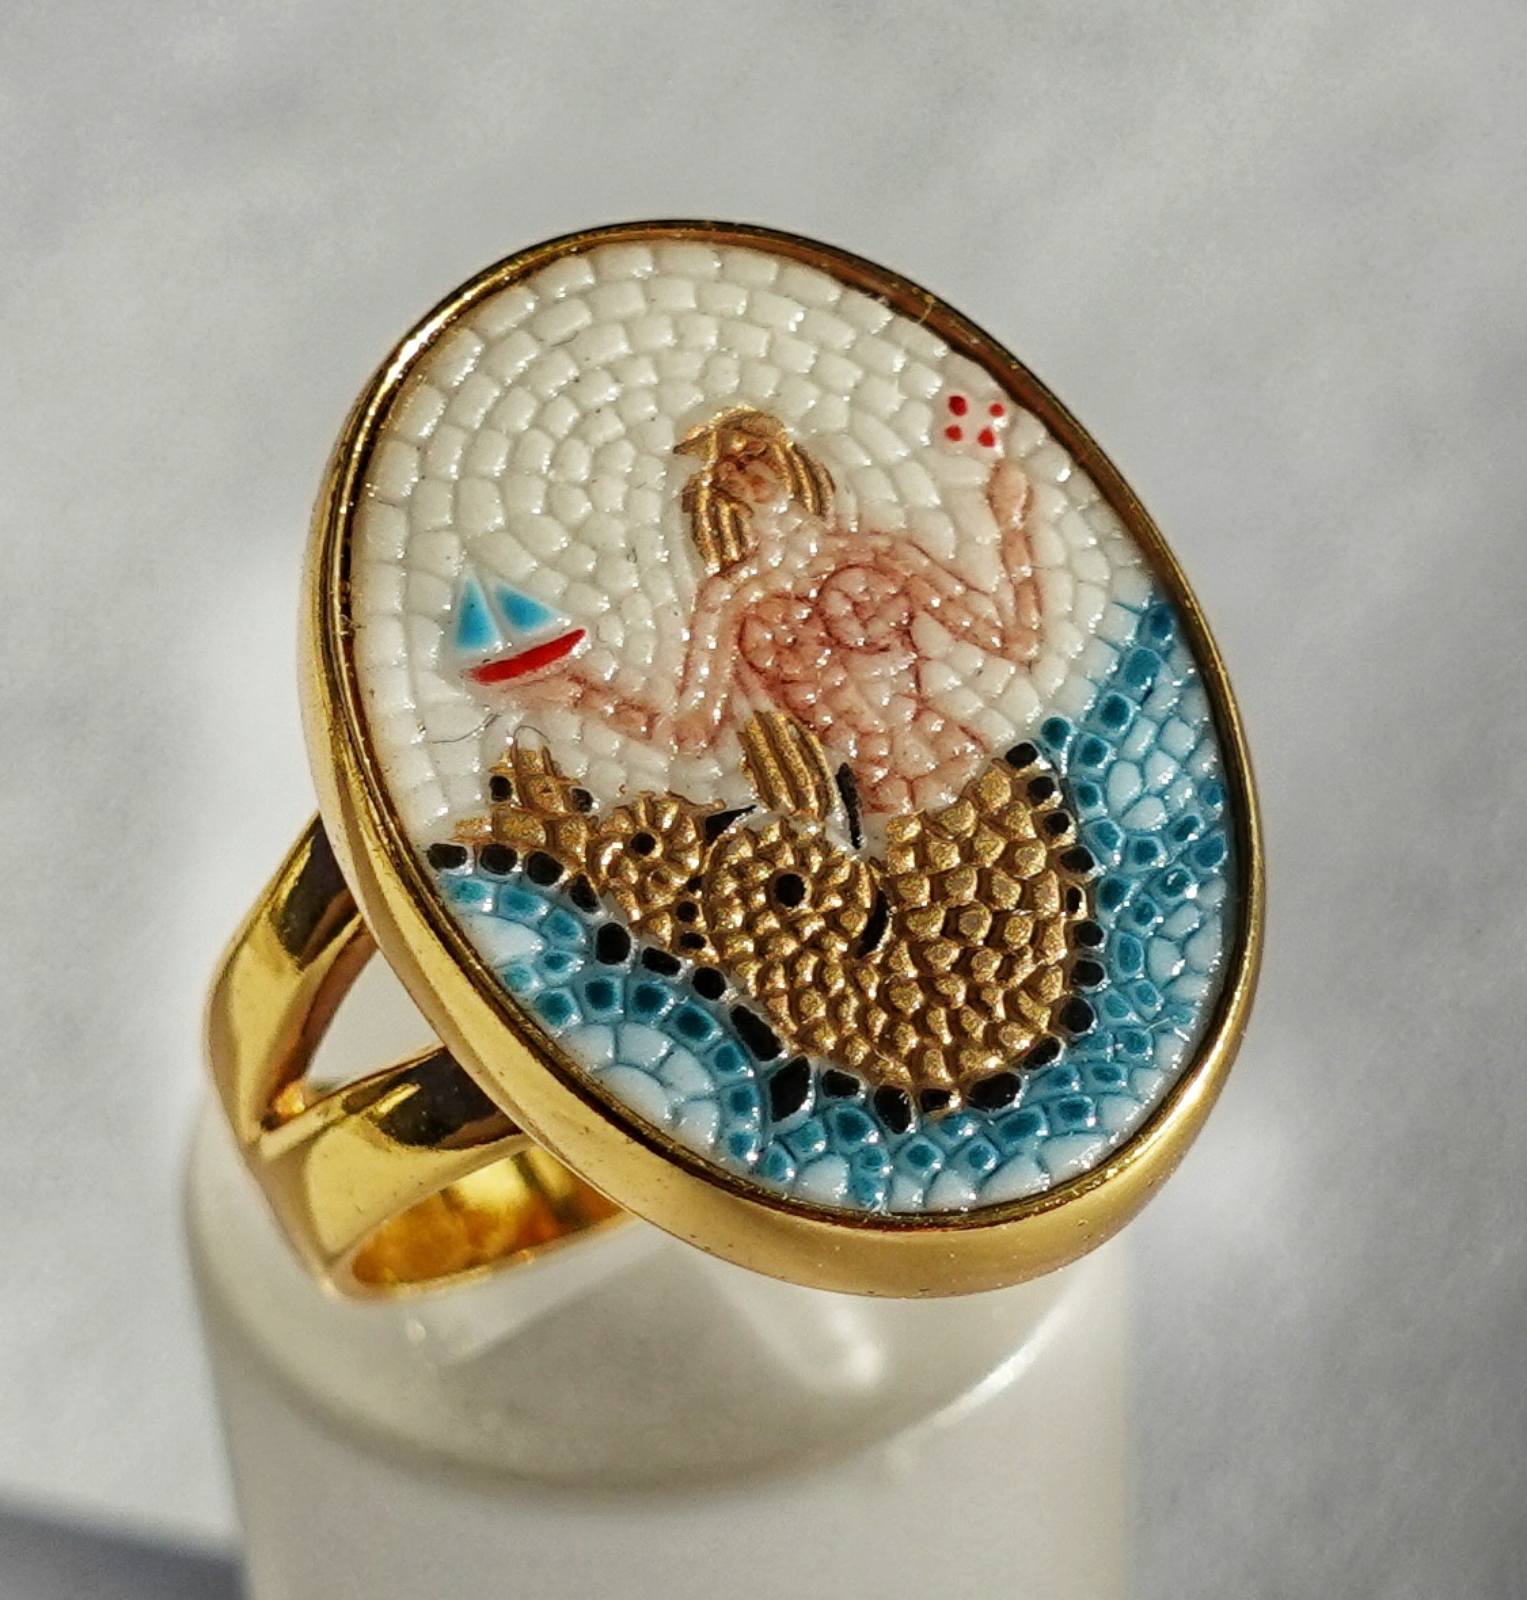 Mermaid micro mosaic ring in solid silver 925 double gold plated 24k